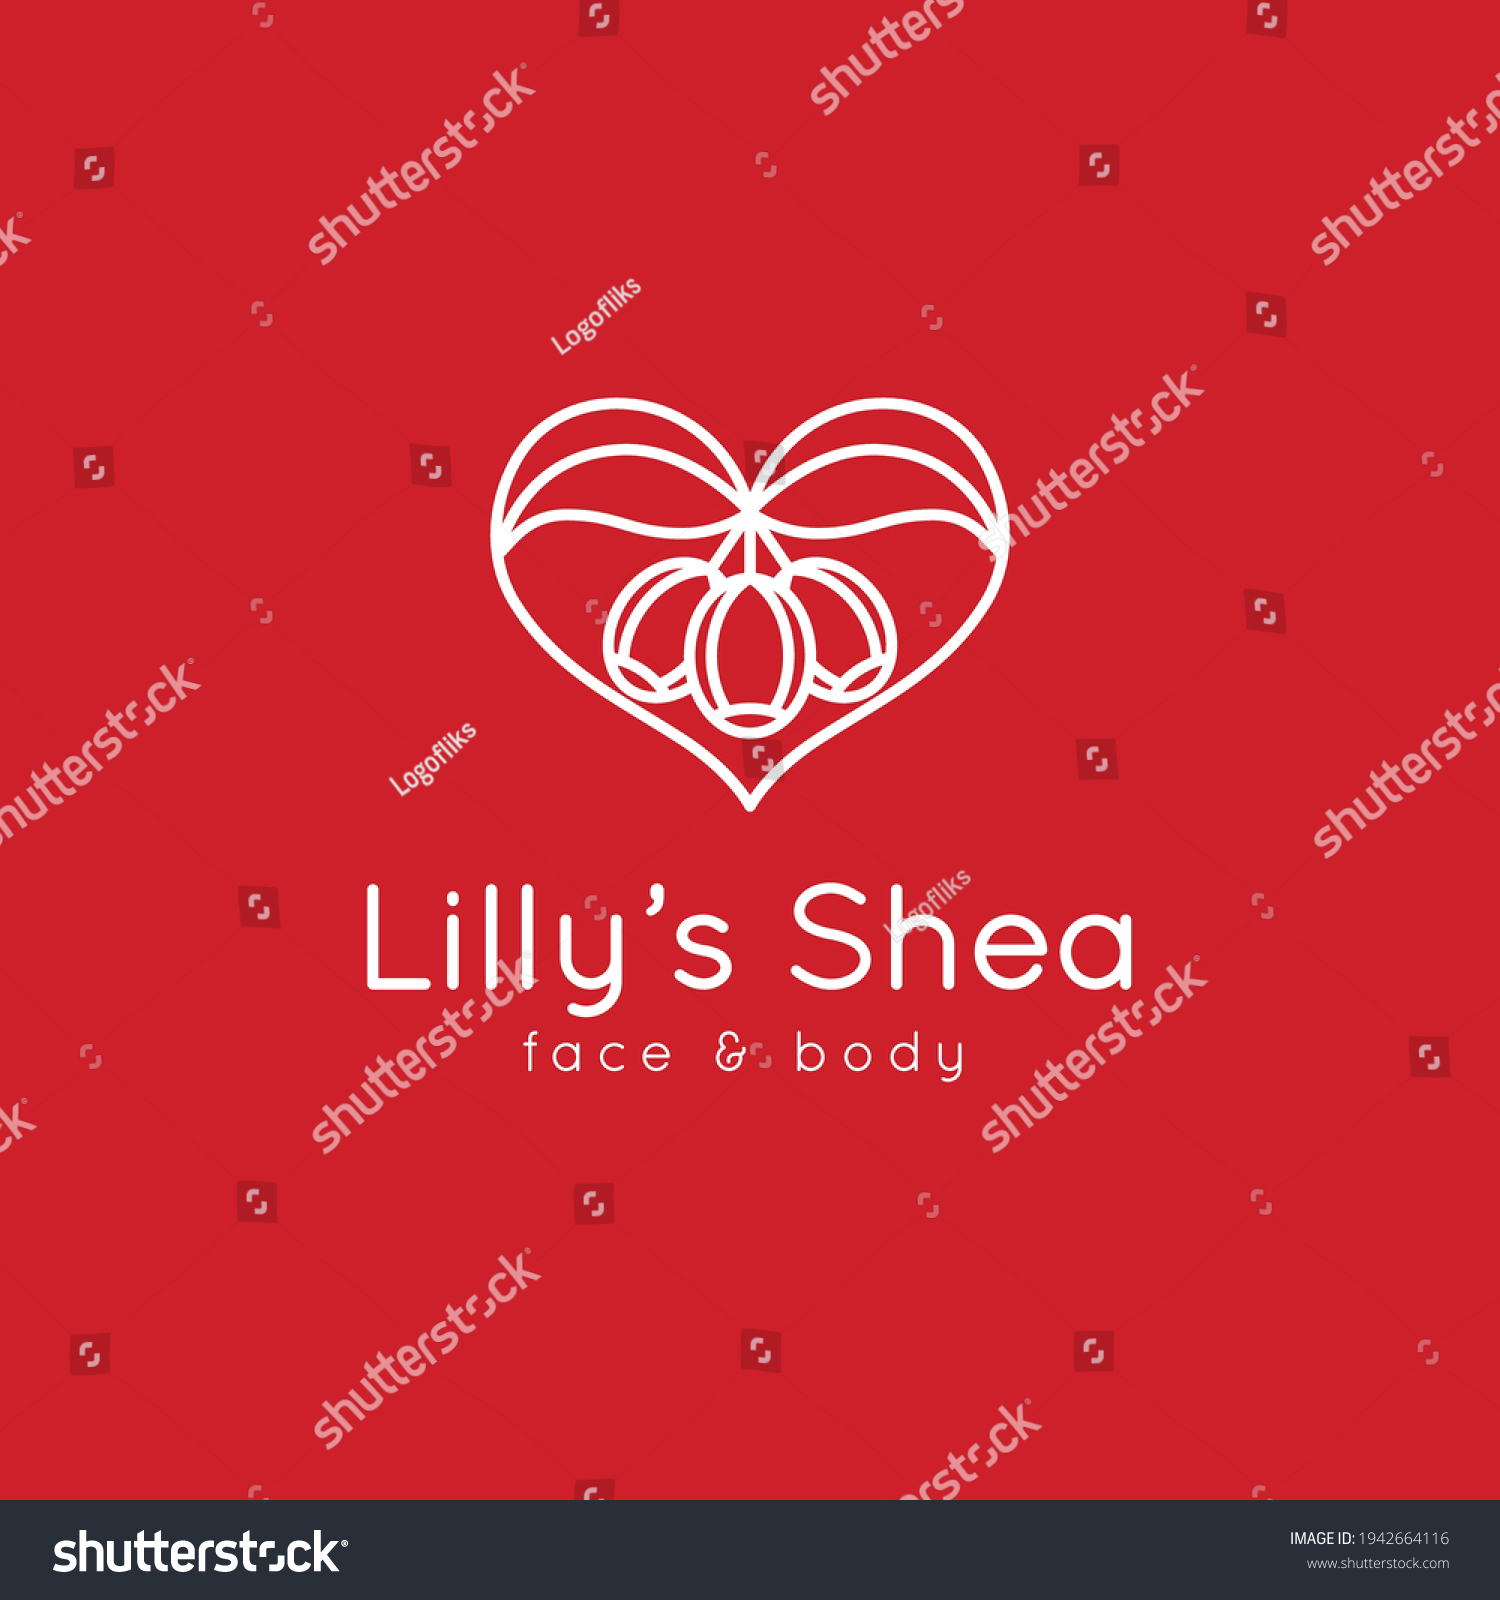 SVG of Shea nuts with leaves and heart shape logo design. Shea butter. Vitellaria paradoxa. Natural, organic cosmetics and medical plant - Illustration svg